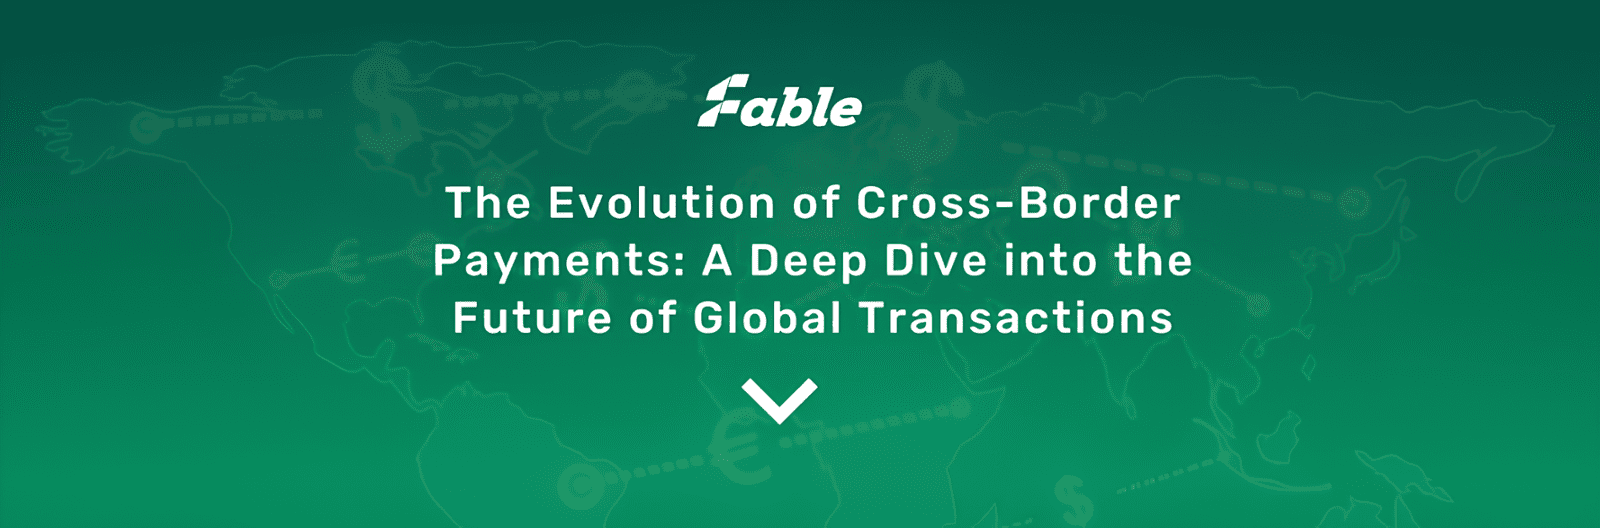 The Evolution of Cross-Border Payments: A Deep Dive into the Future of Global Transactions